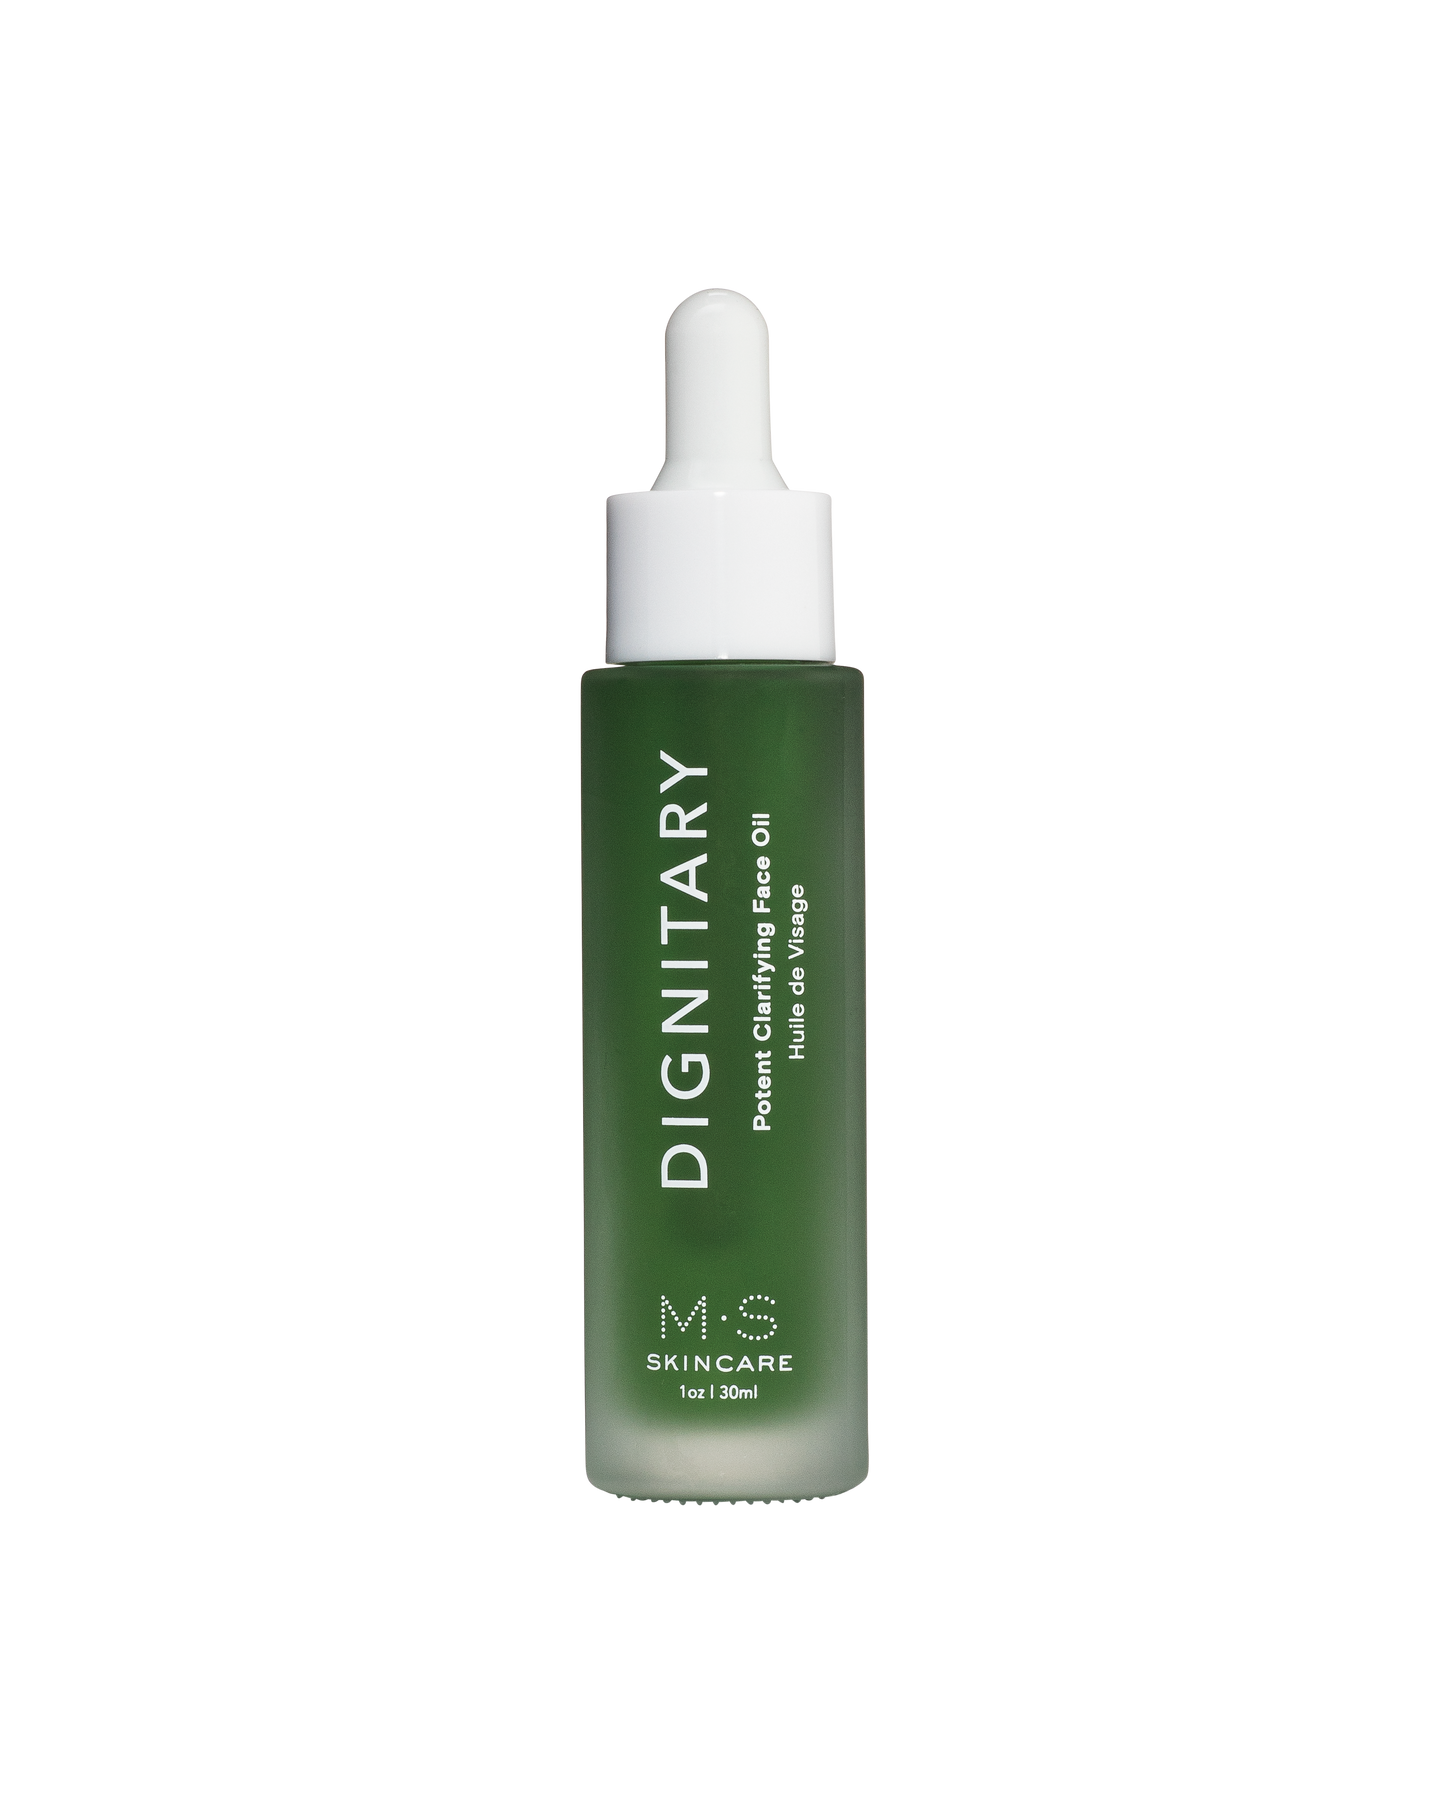 DIGNITARY | Clarifying Face Oil by Mullein and Sparrow